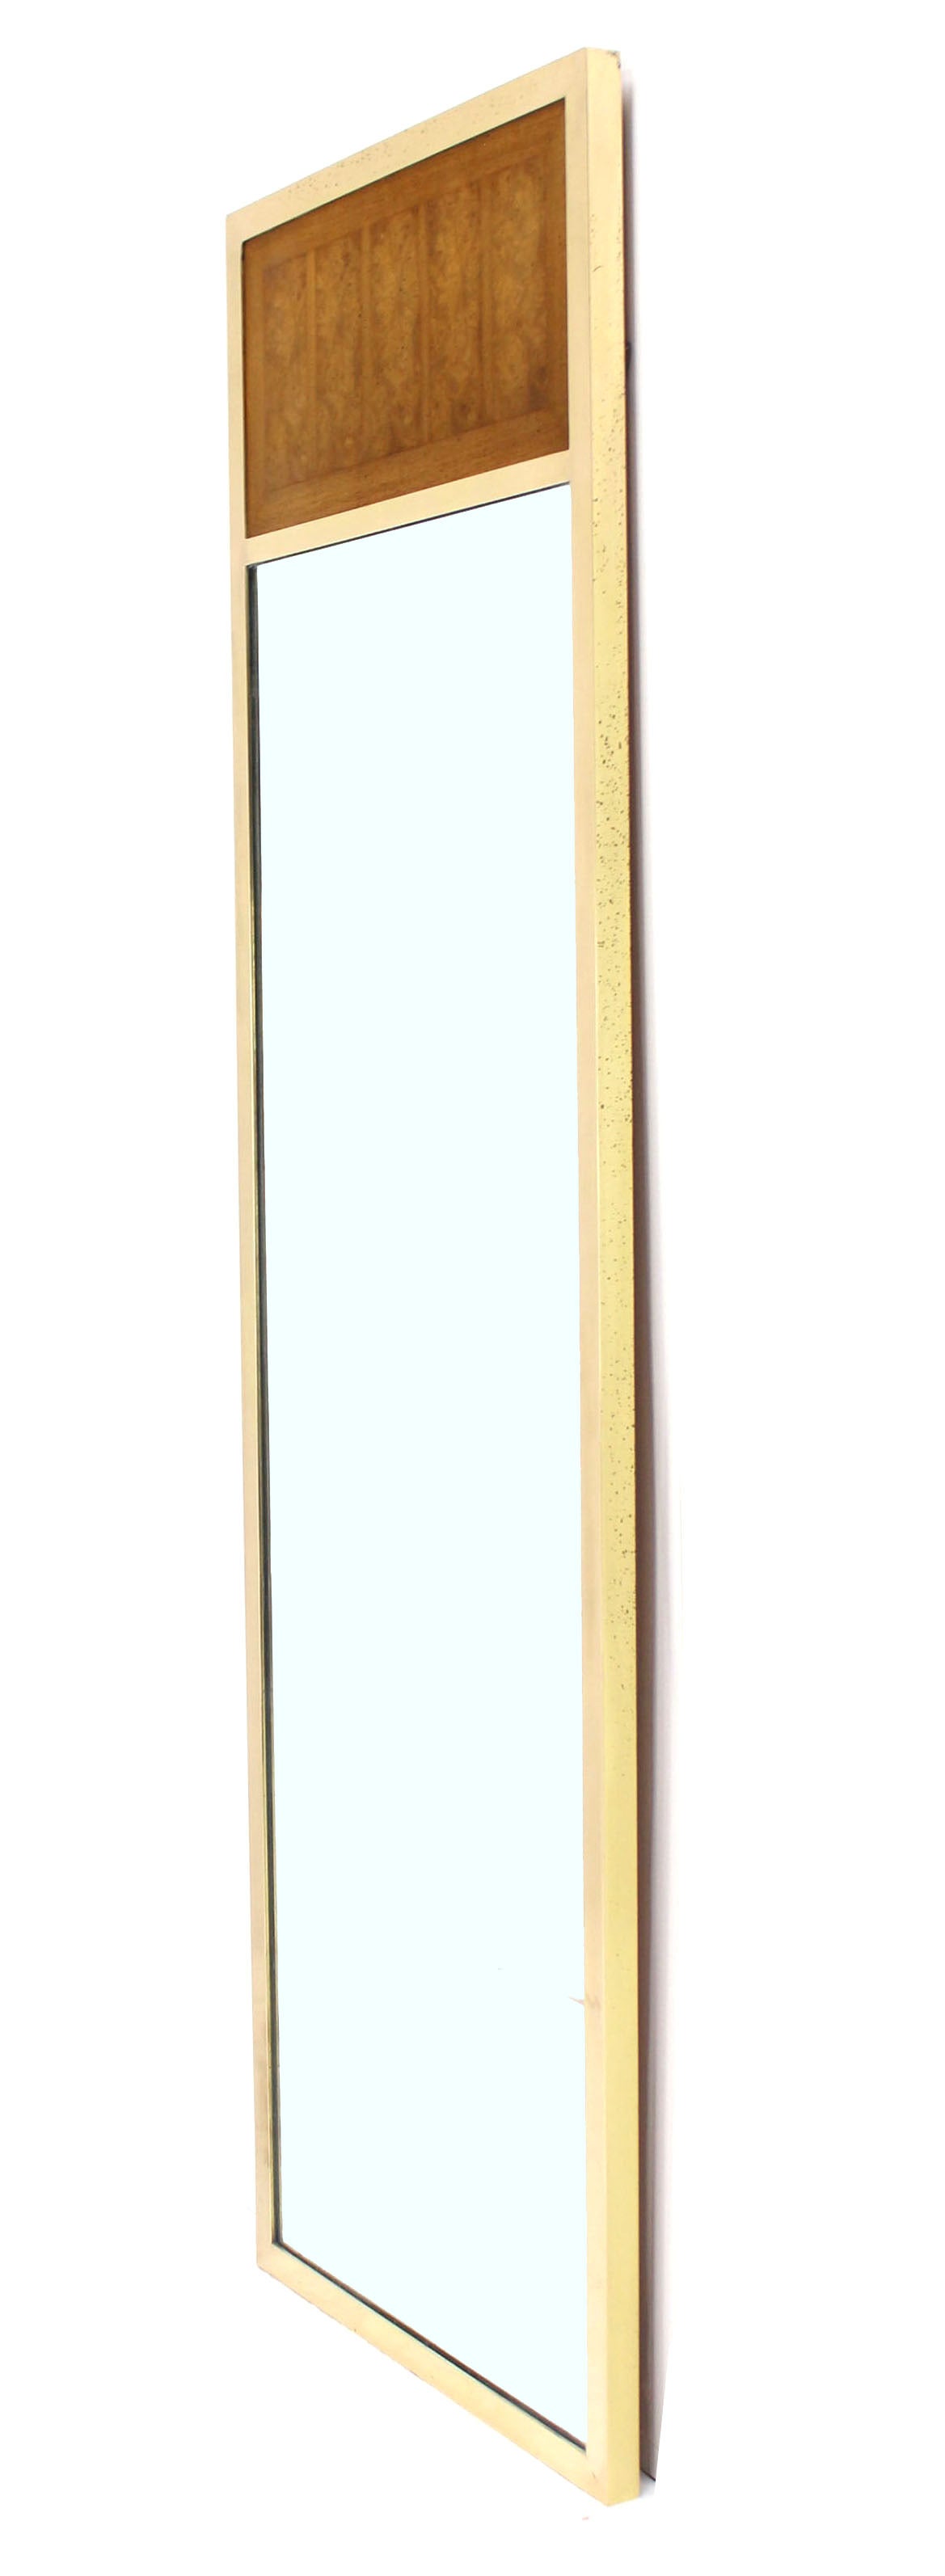 Solid brass frame mid-century modern mirror in style of Paul McCobb.